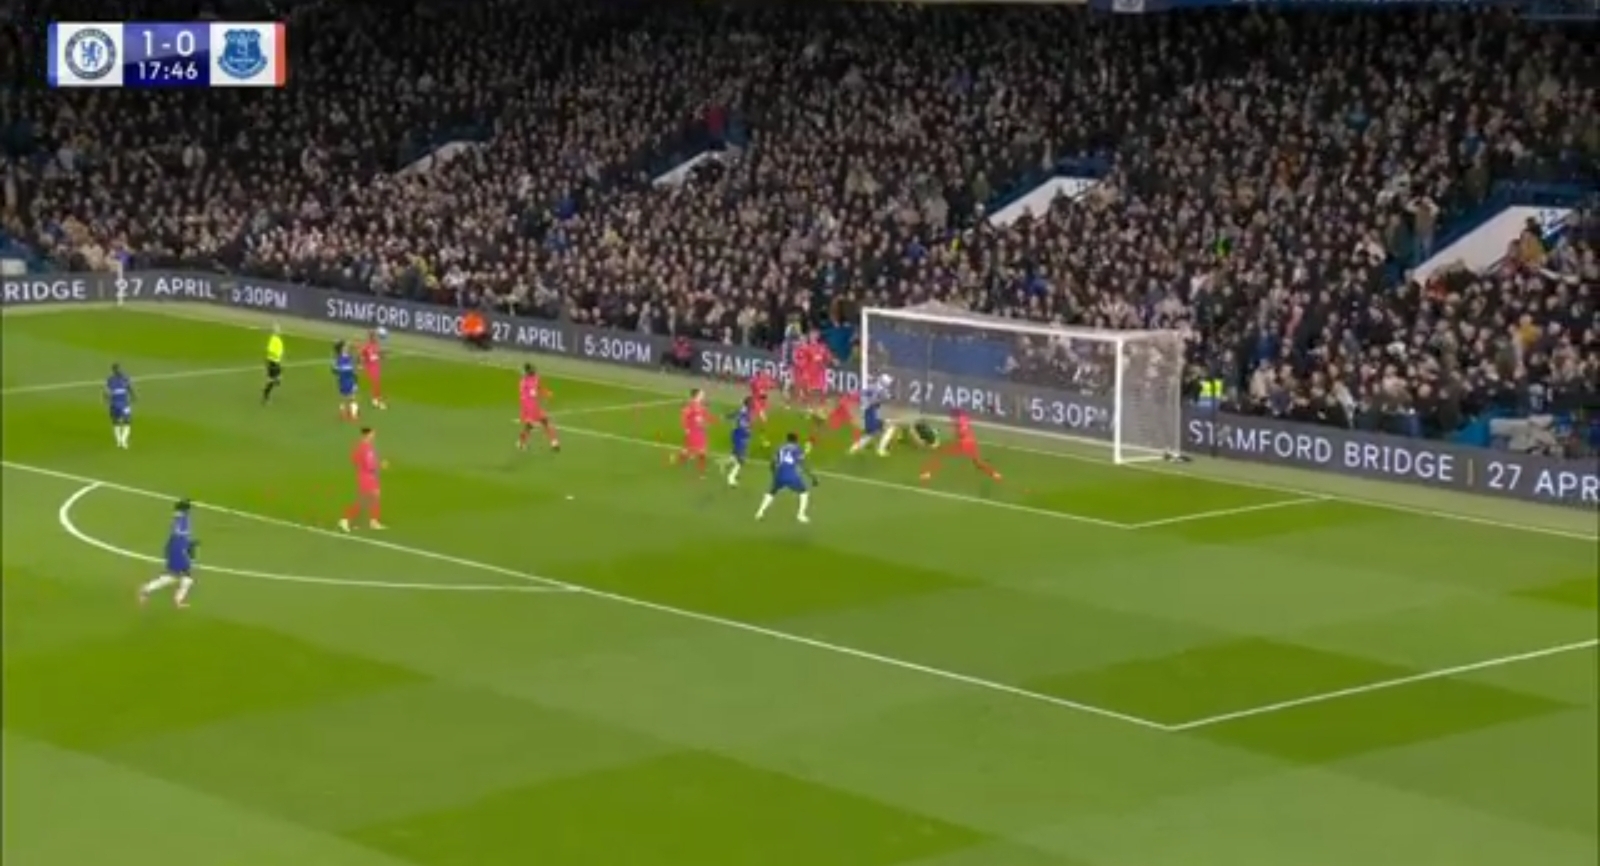 Watch: Cole Palmer doubles Chelsea’s lead from close range